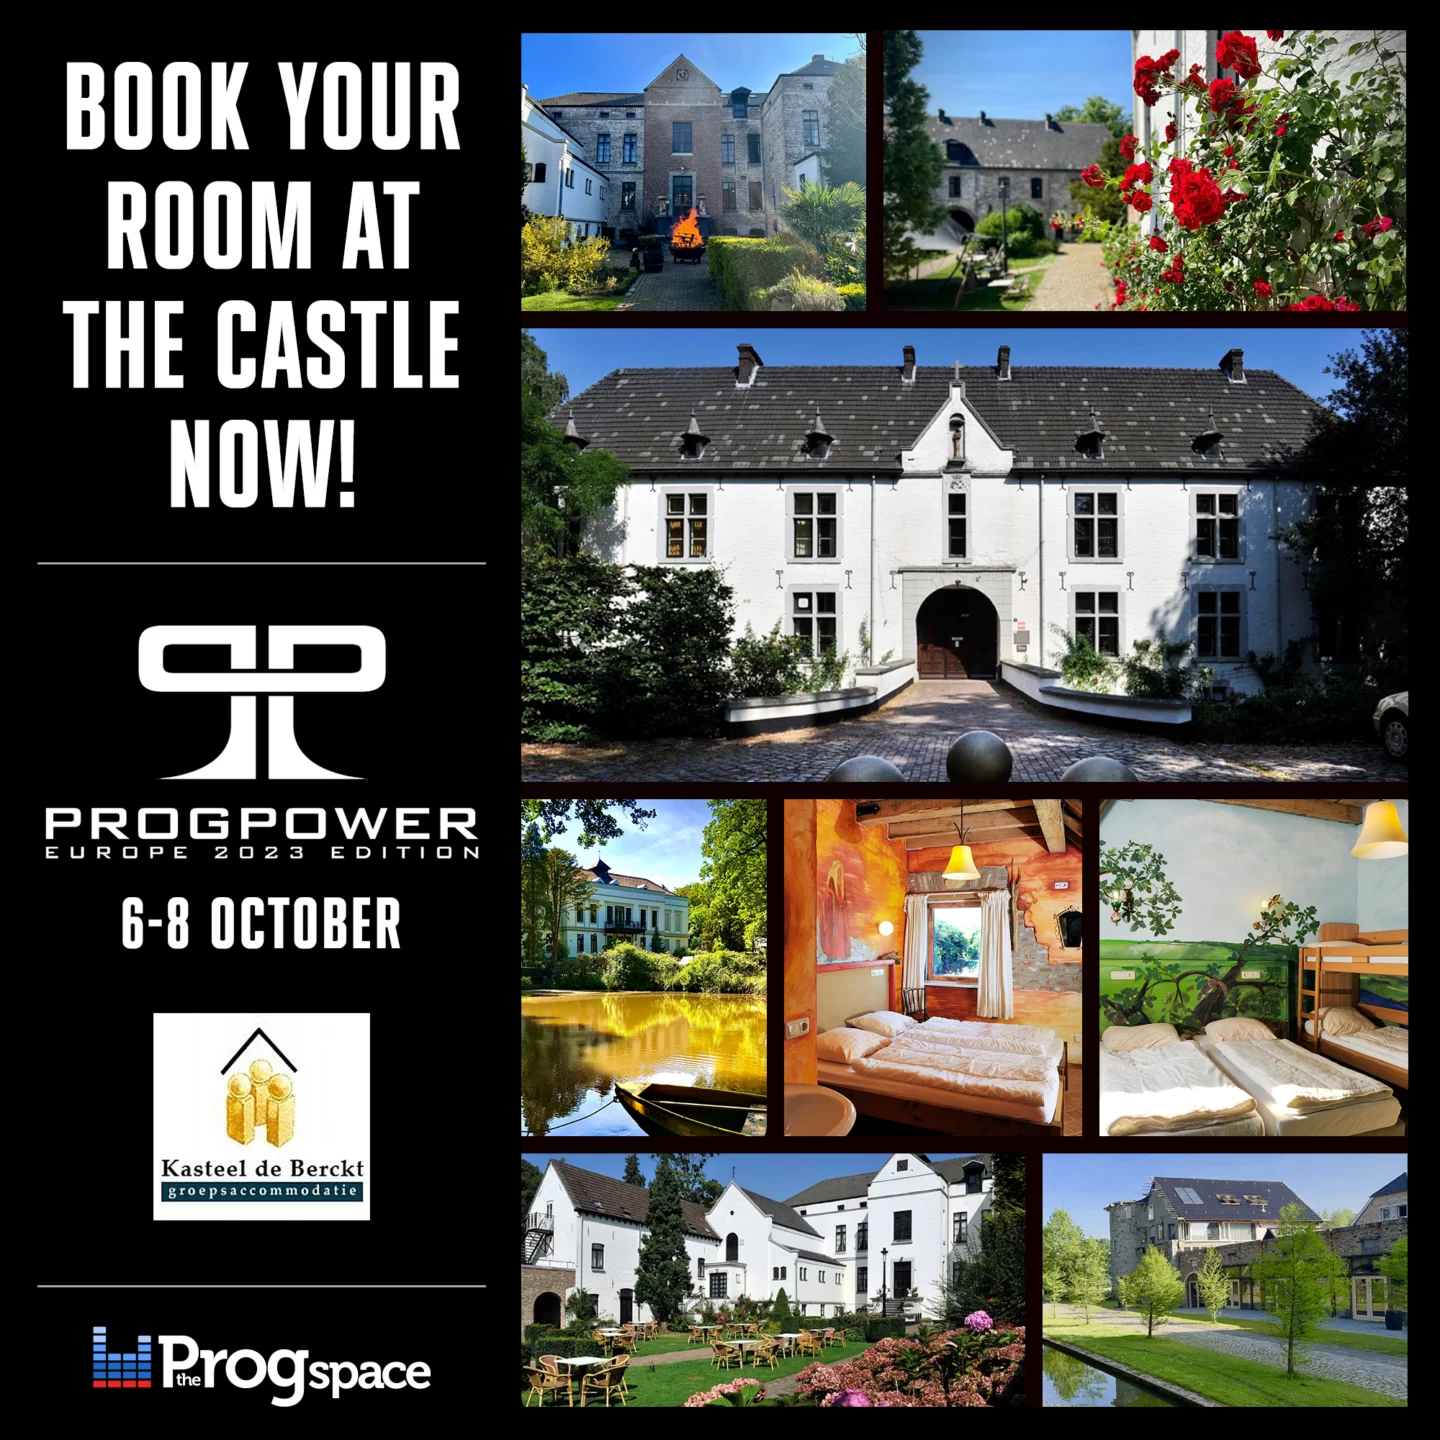 ProgPower Europe 2023: Book your room at The Castle now!